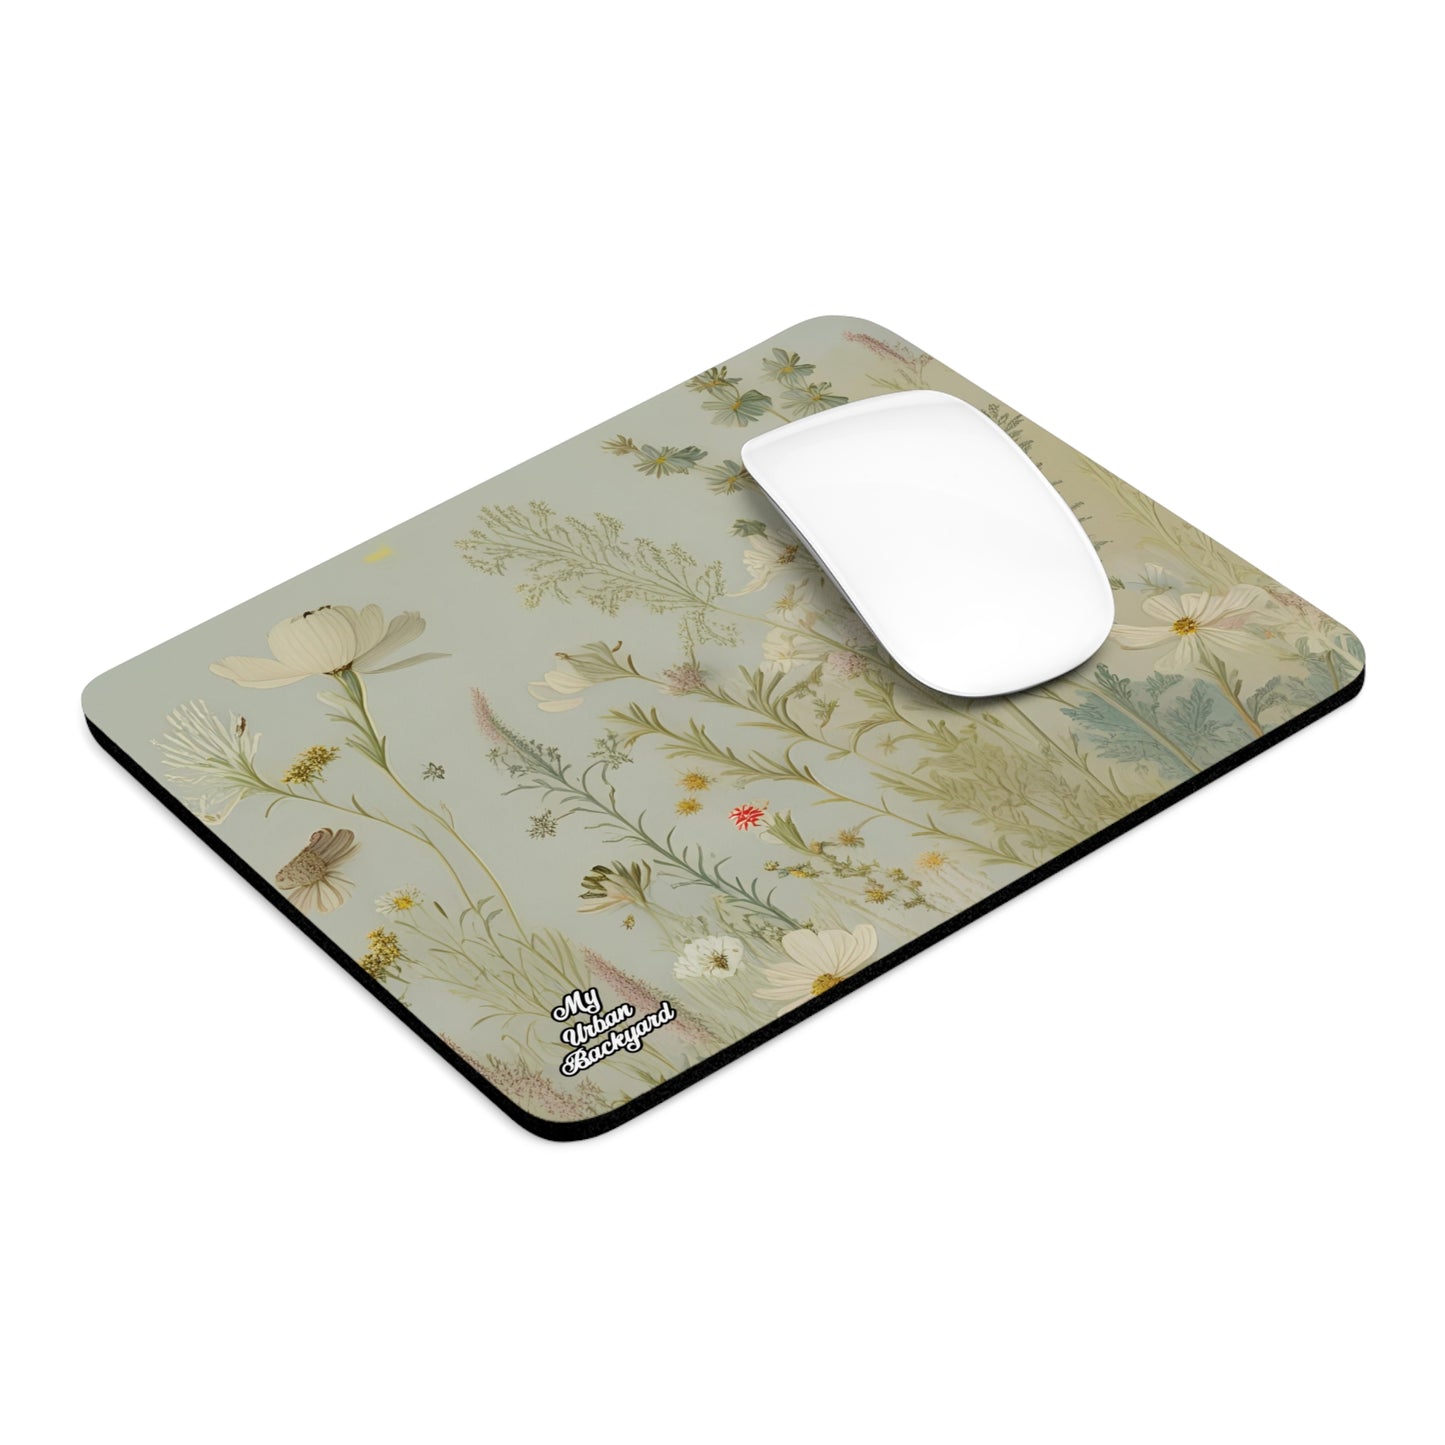 Hazy Day Flowers, Computer Mouse Pad - for Home or Office